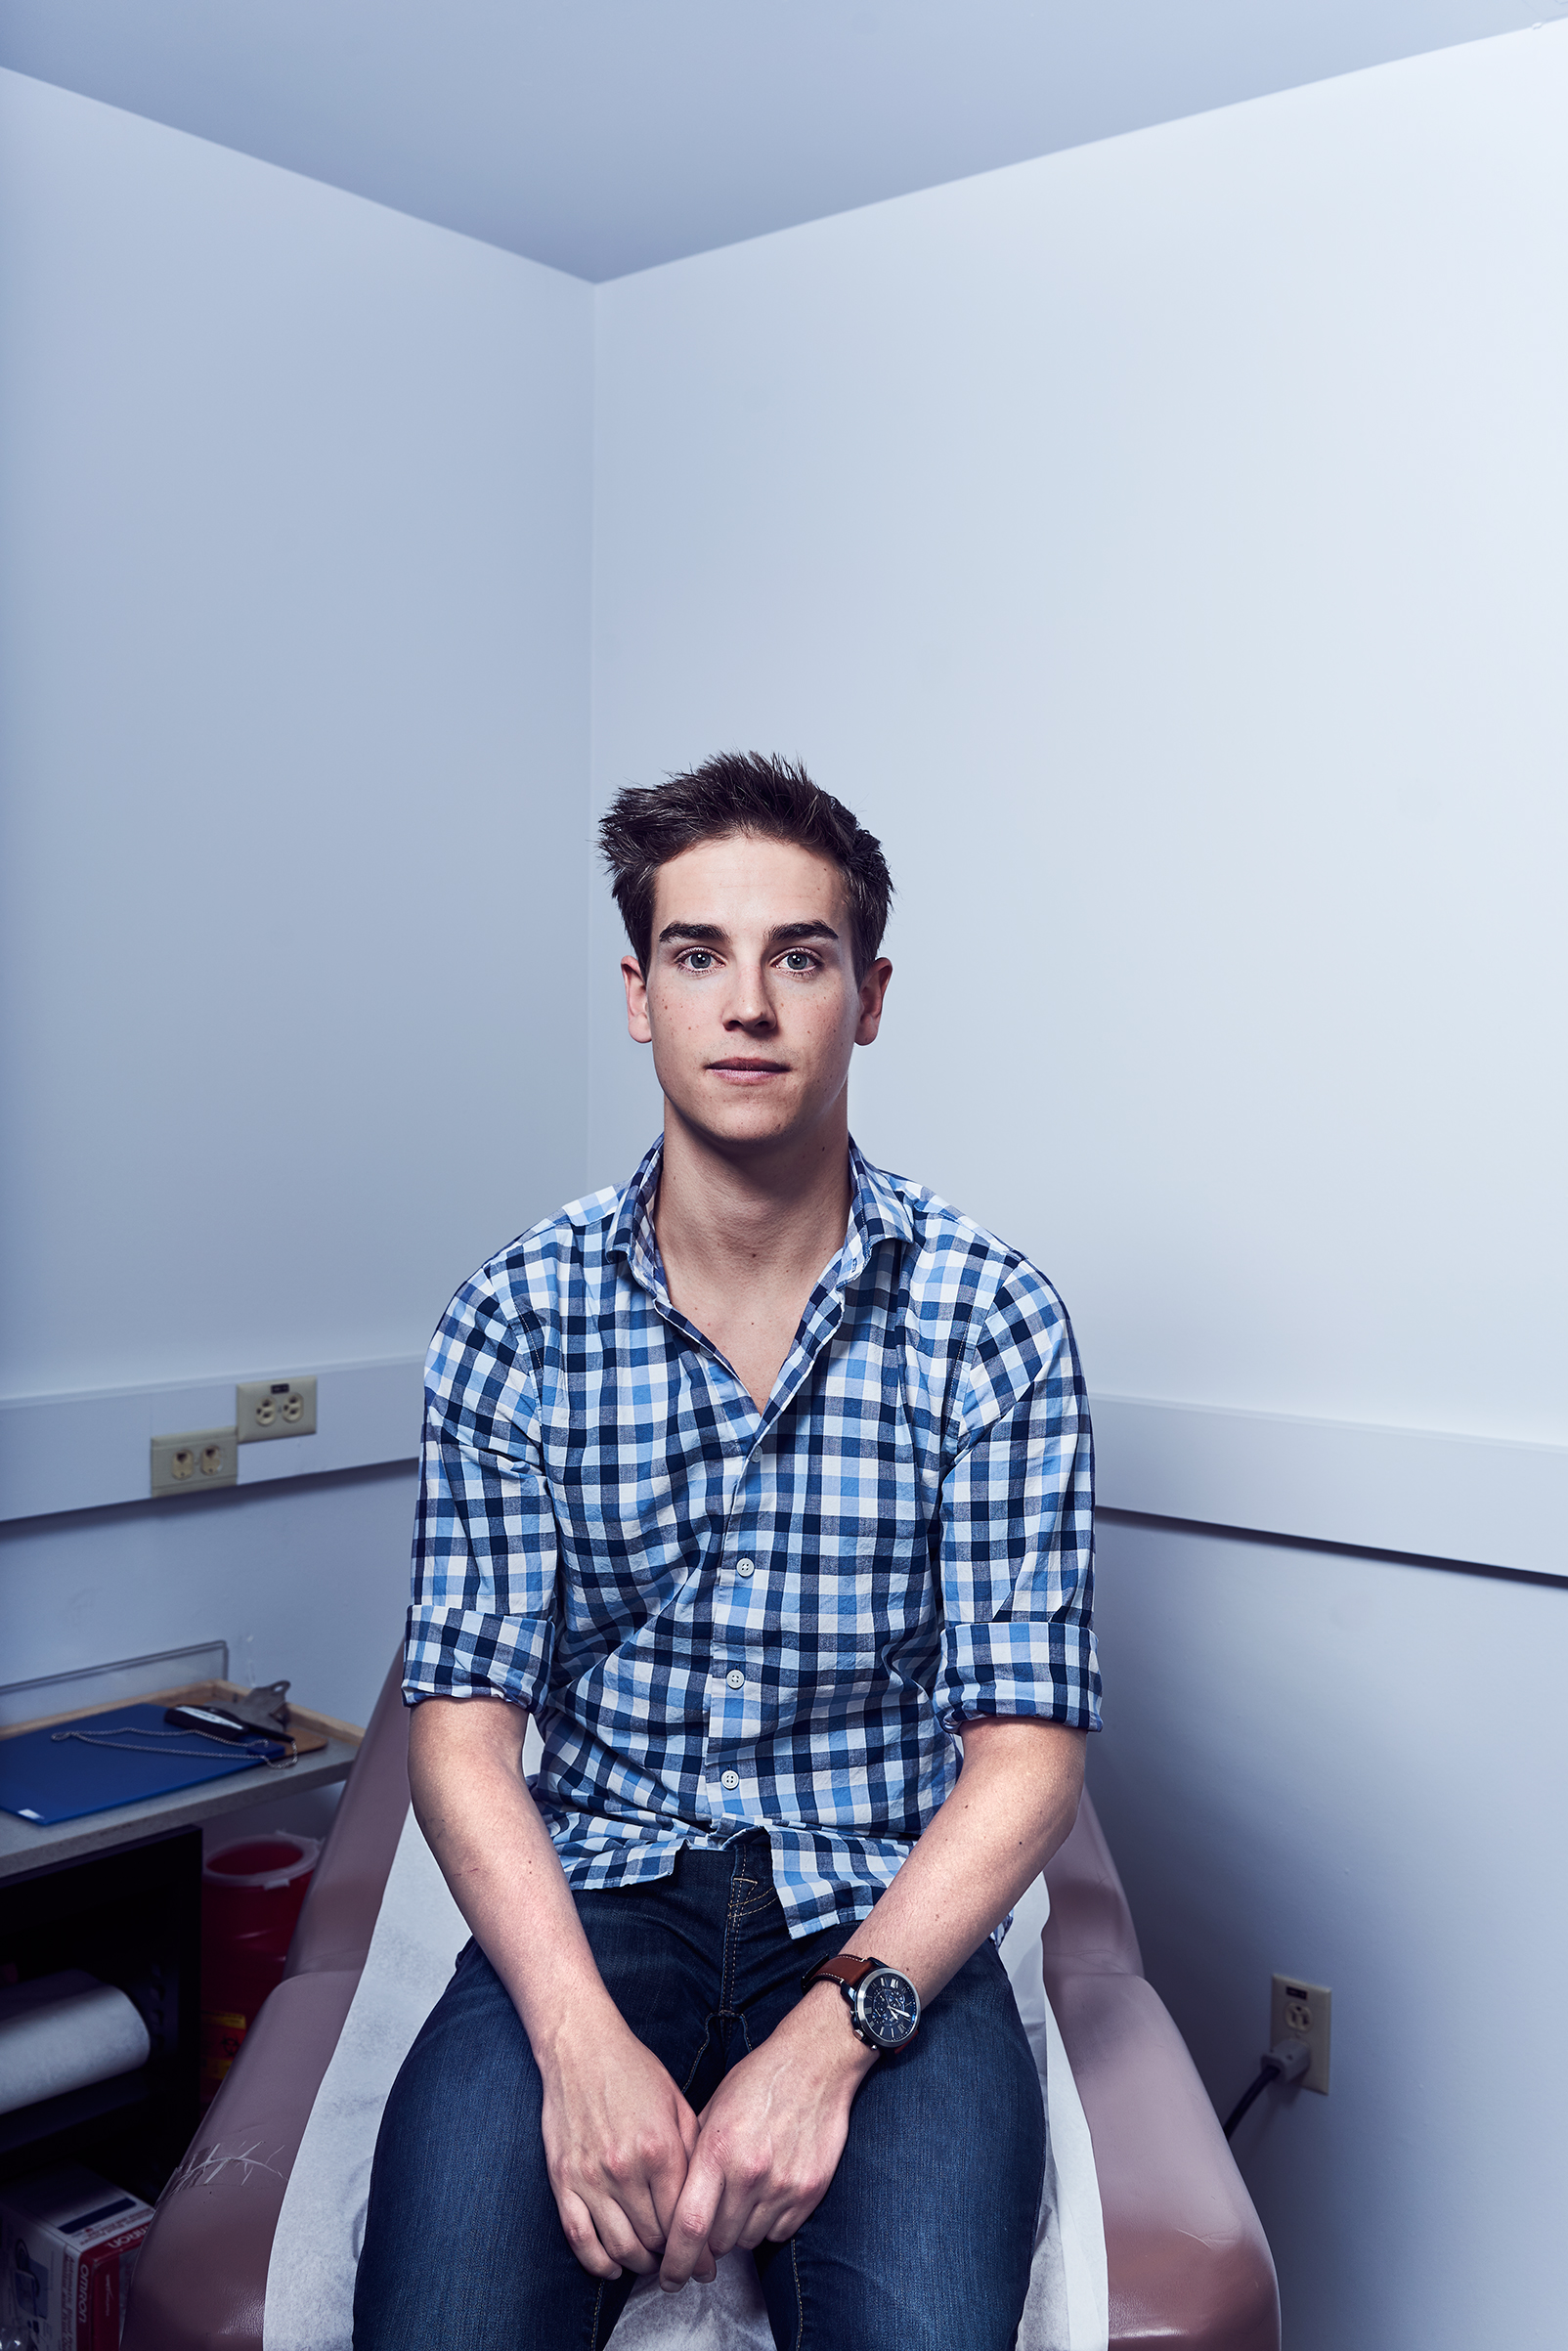 Kristoffer Thordarson, 22, has participated in early studies of male contraceptive methods at the University of Washington School of Medicine (Ian Allen for TIME)